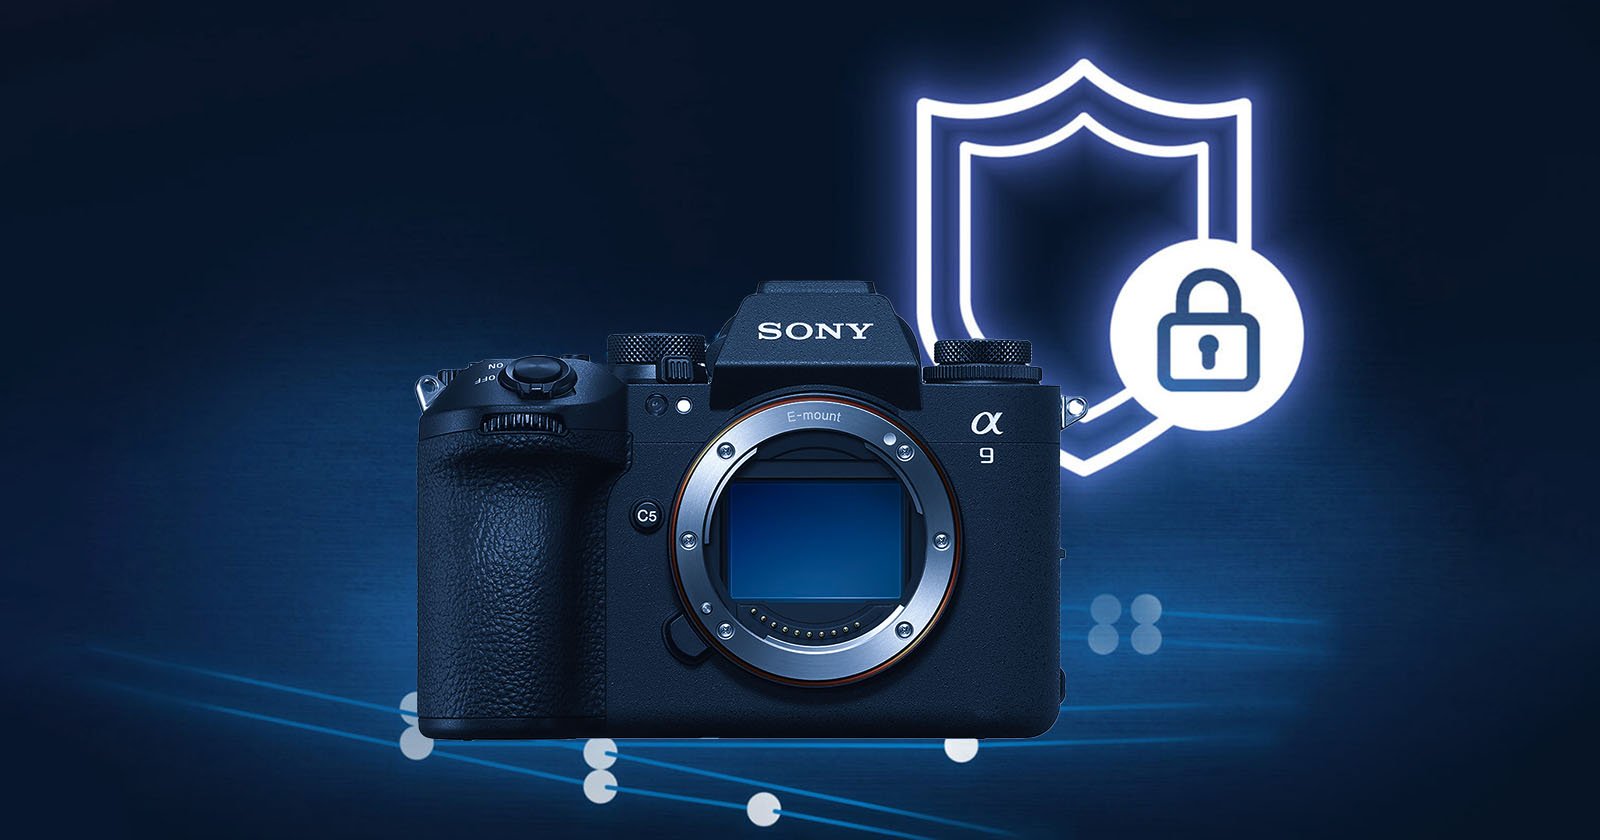 Sony’s In-Camera Authentication Technology Passes AP’s Tests | PetaPixel